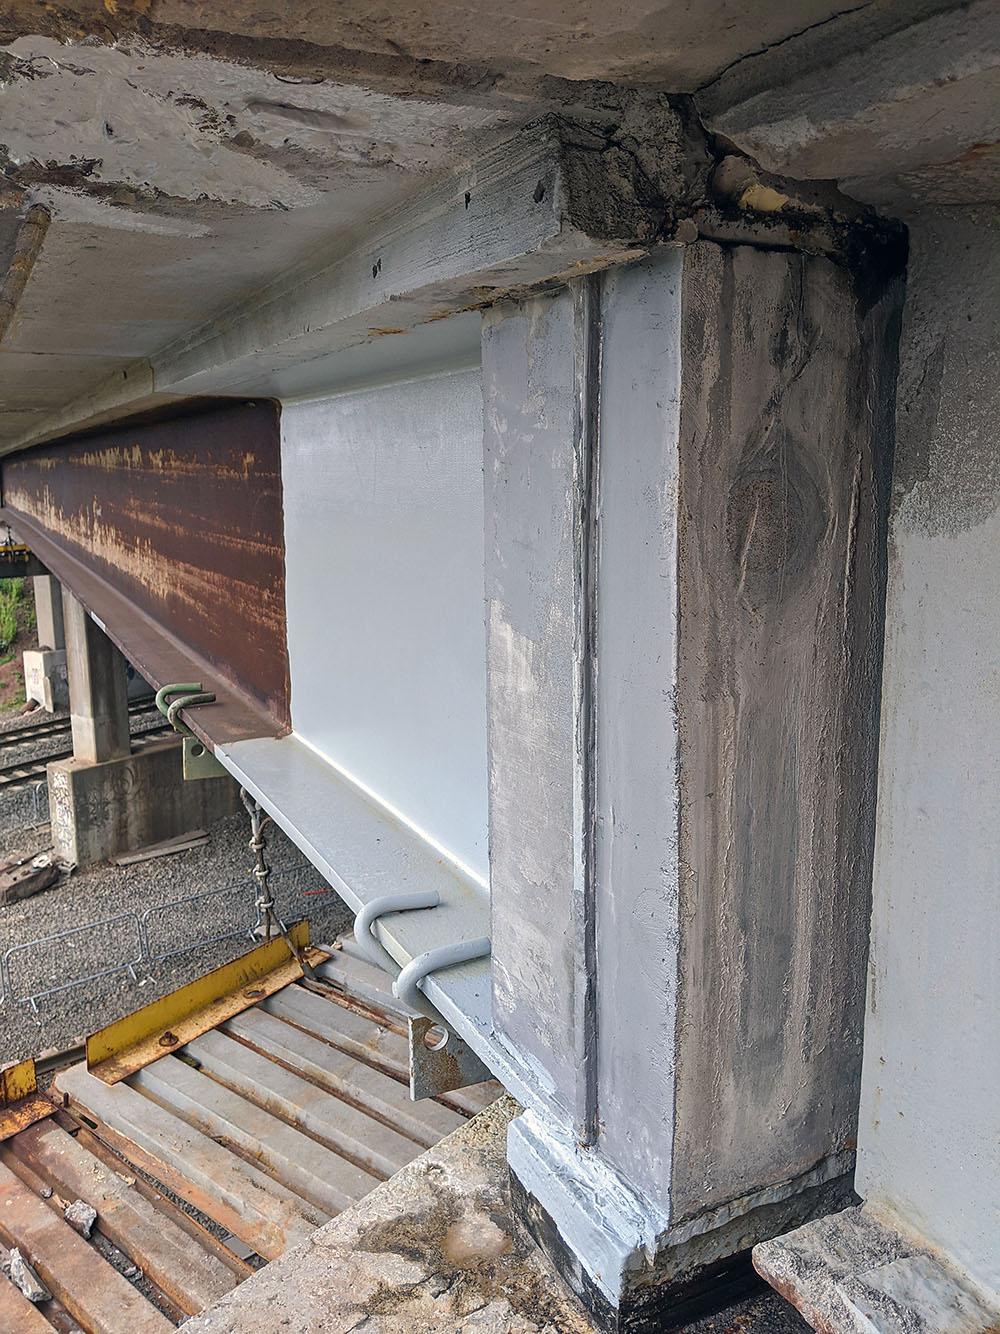 bride beam end repair with welded shear connectors to the UHPC